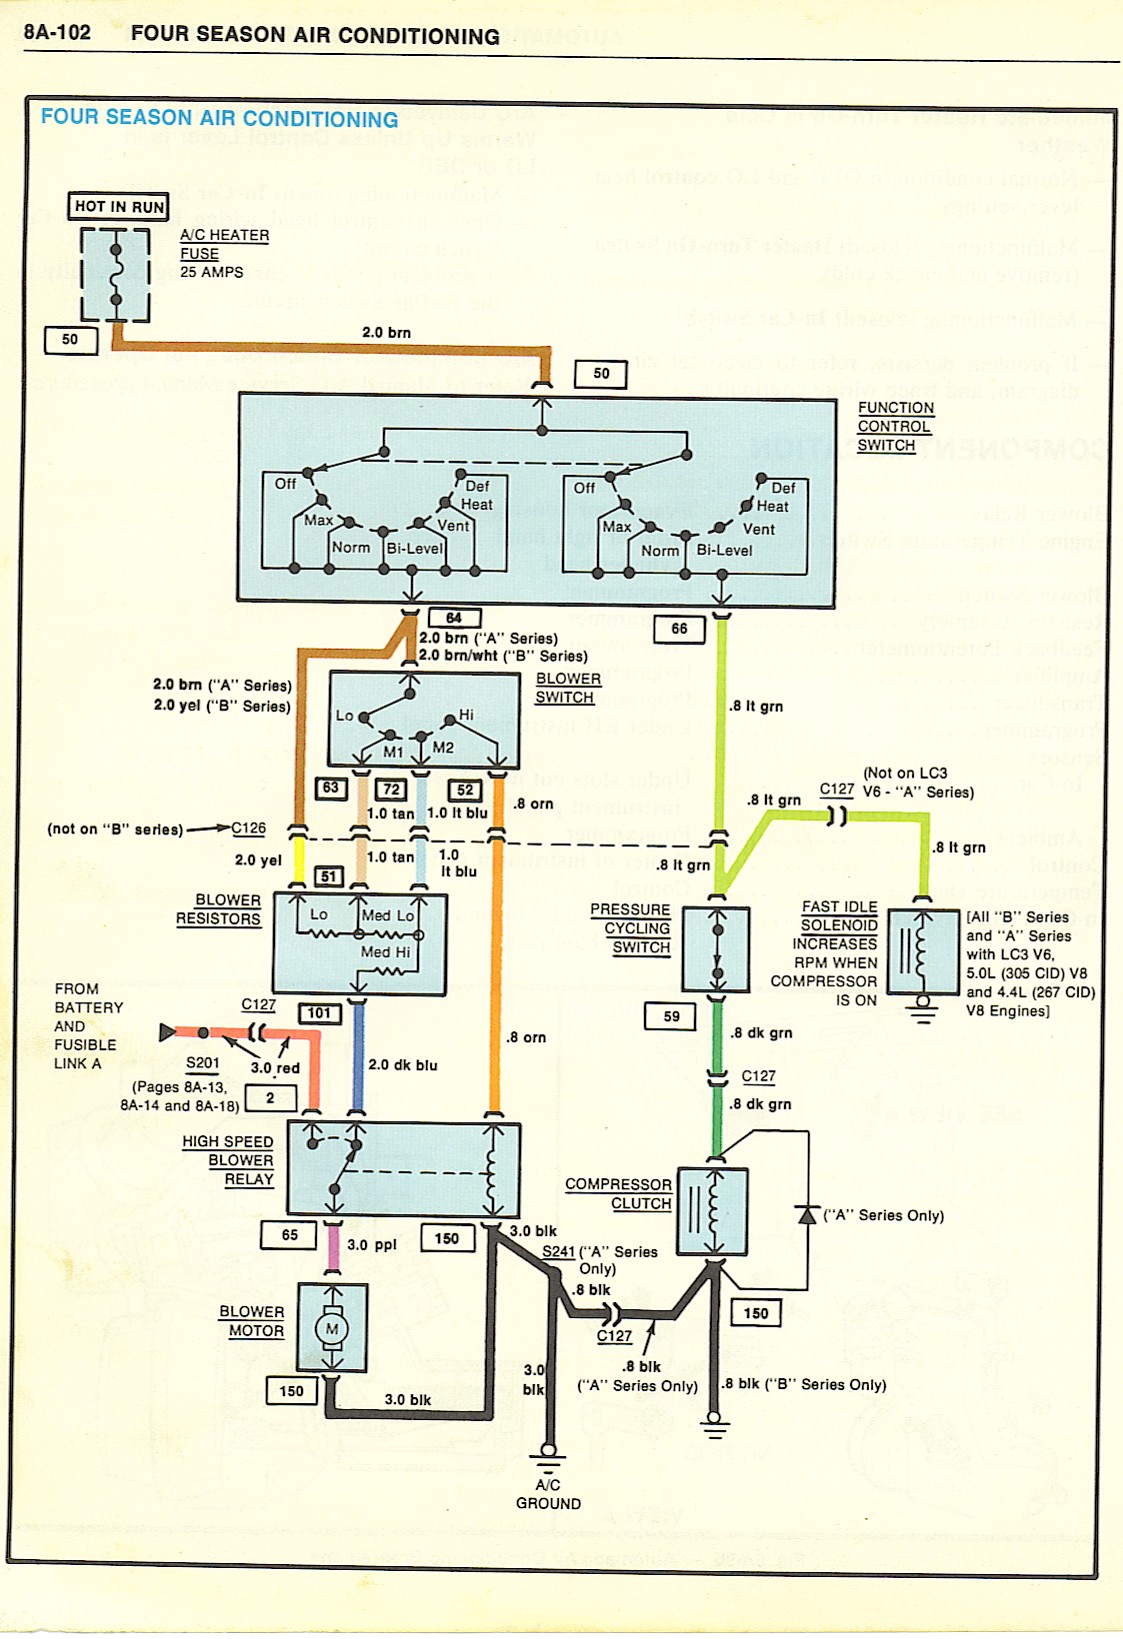 Wiring Diagram For Nest Thermostat Split System from www.maliburacing.com